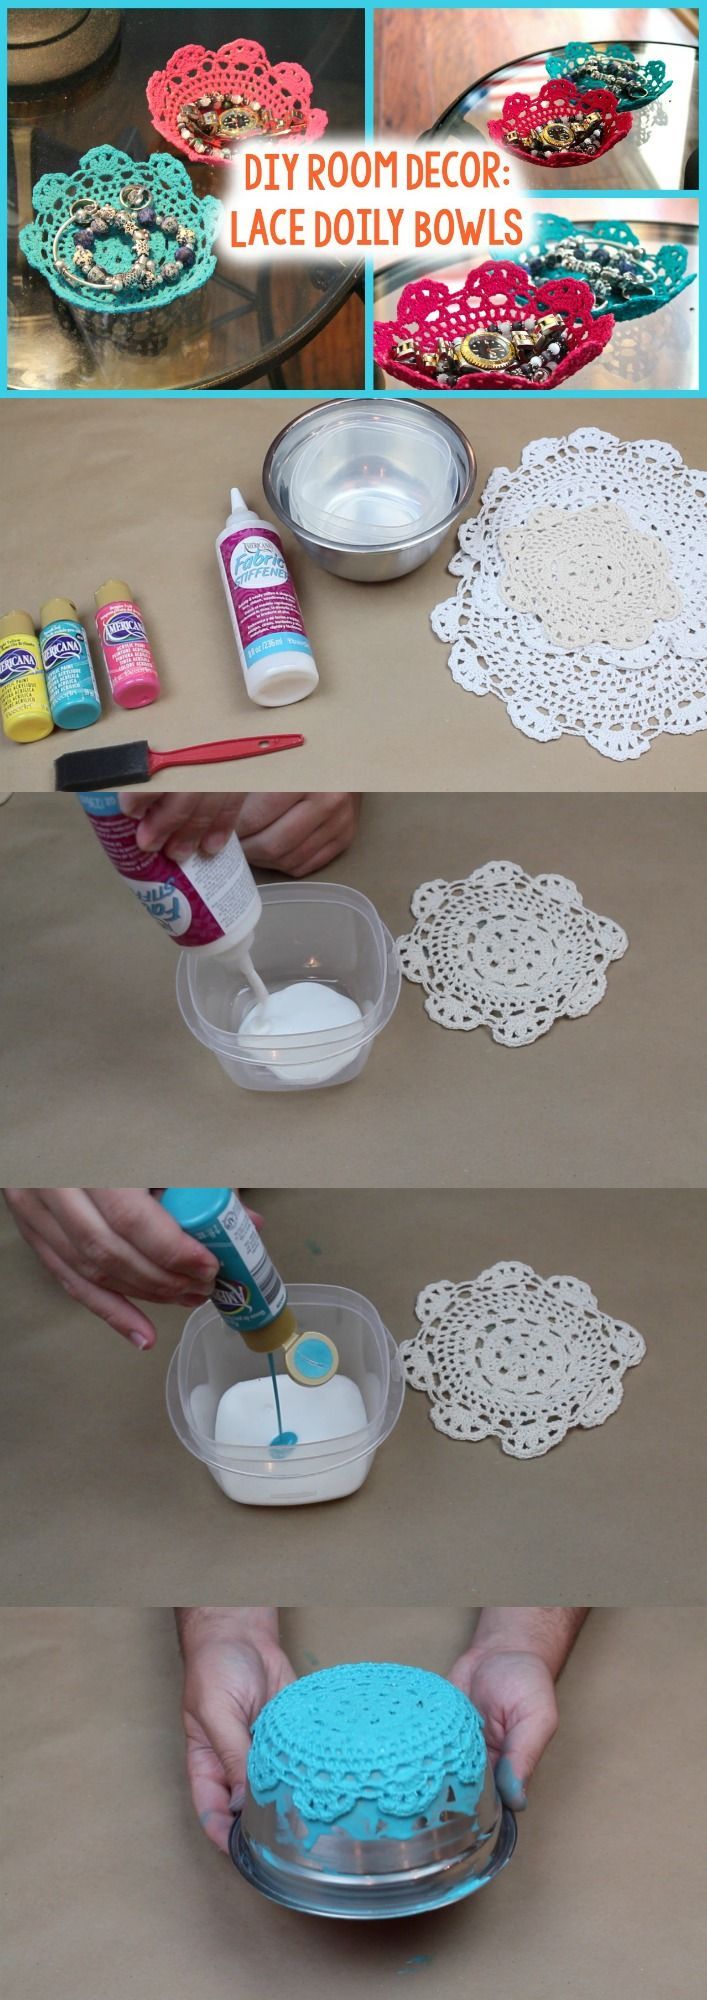 DIY Lace Doily Bowl – A Little Craft In Your Day